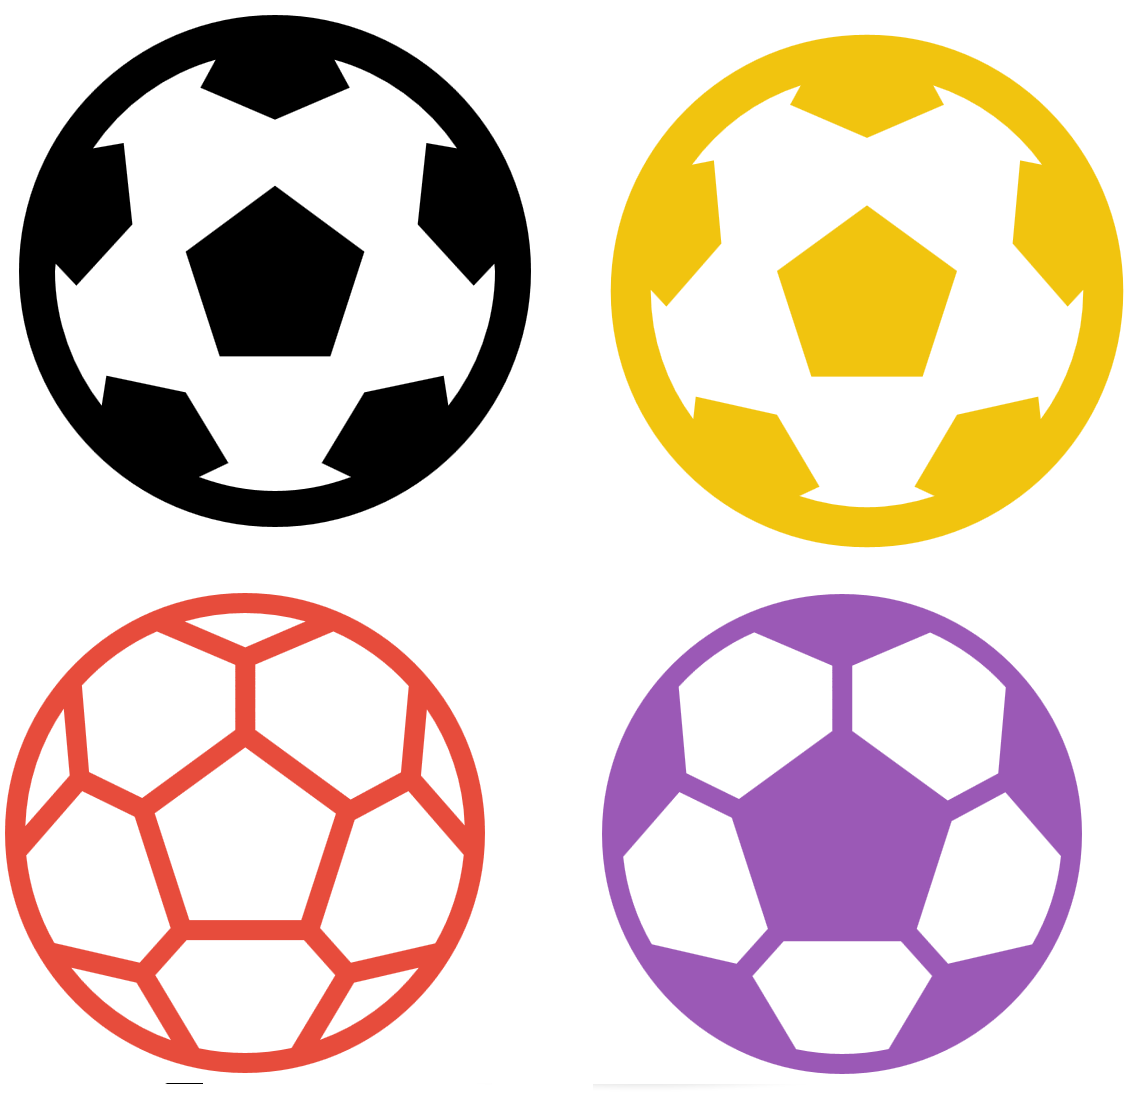 Soccer Icon On Black And White Vector Backgrounds Vector Art 